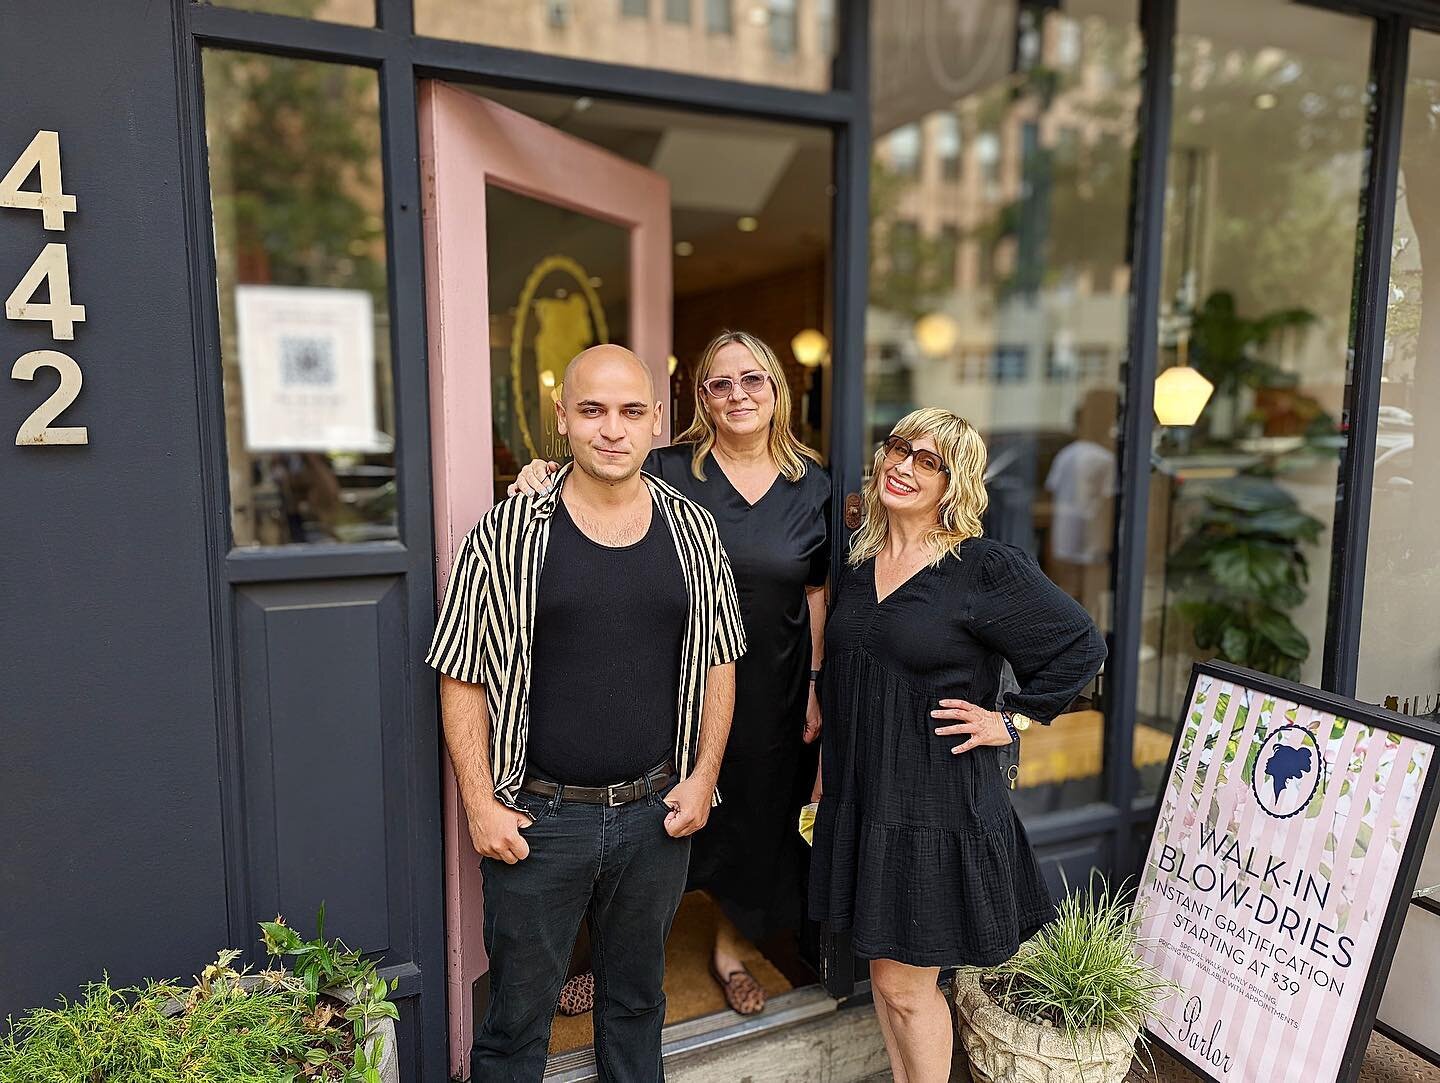 Since day one we&rsquo;ve been a family business and so grateful for all of our guests and team for becoming our extended family over these years, too! 

Pictured here is (left to right)  Arman, Gwenn, and Sarah! Third and fourth generations ☺️ 

Lou